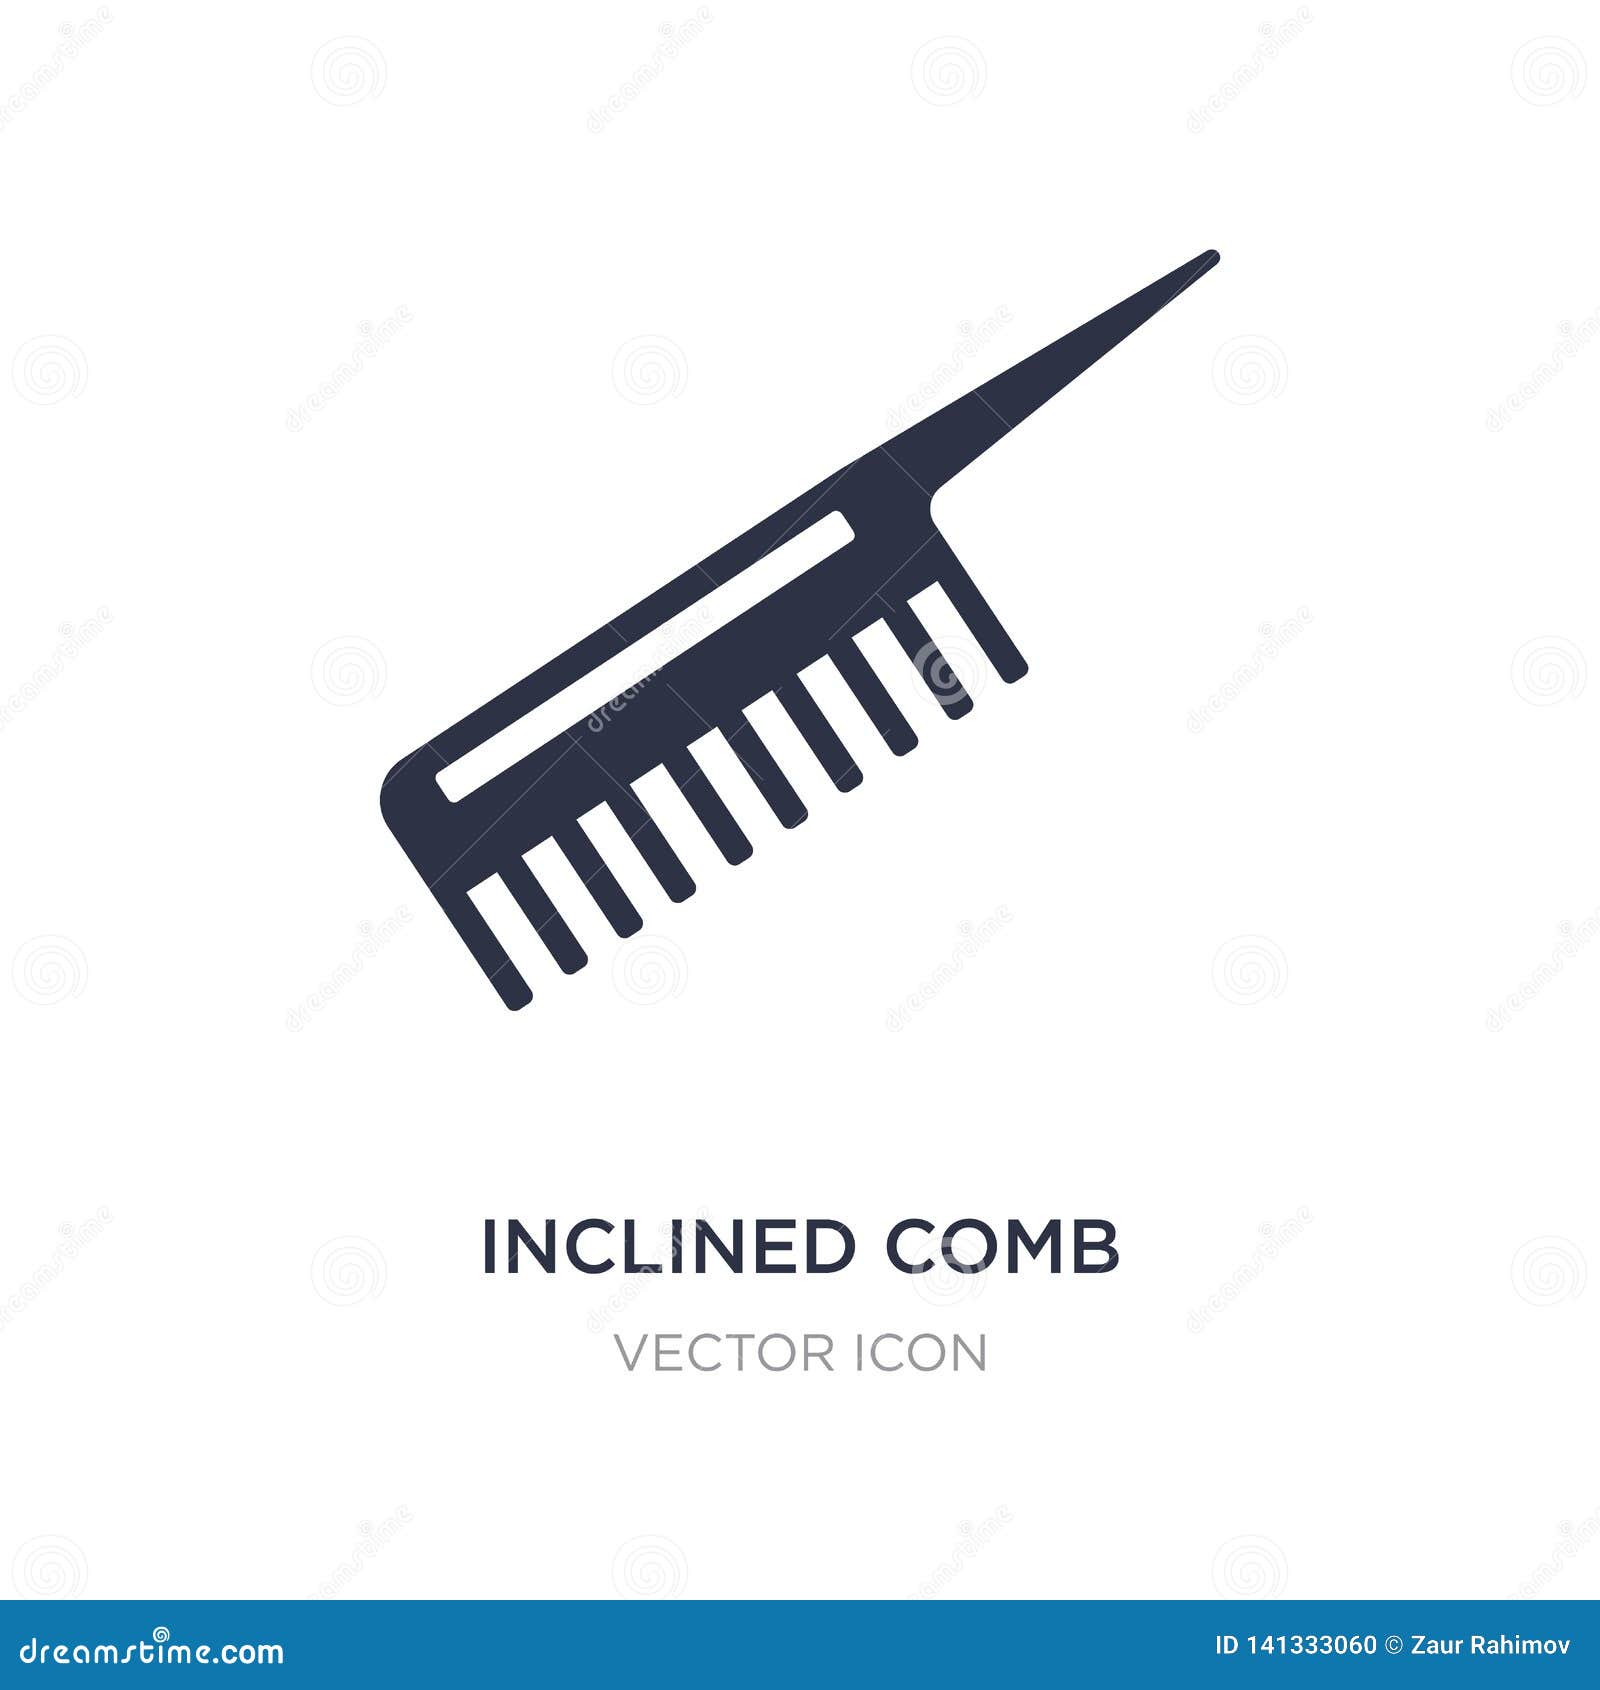 Inclined Comb Vector Icon On White Background Flat Vector Inclined